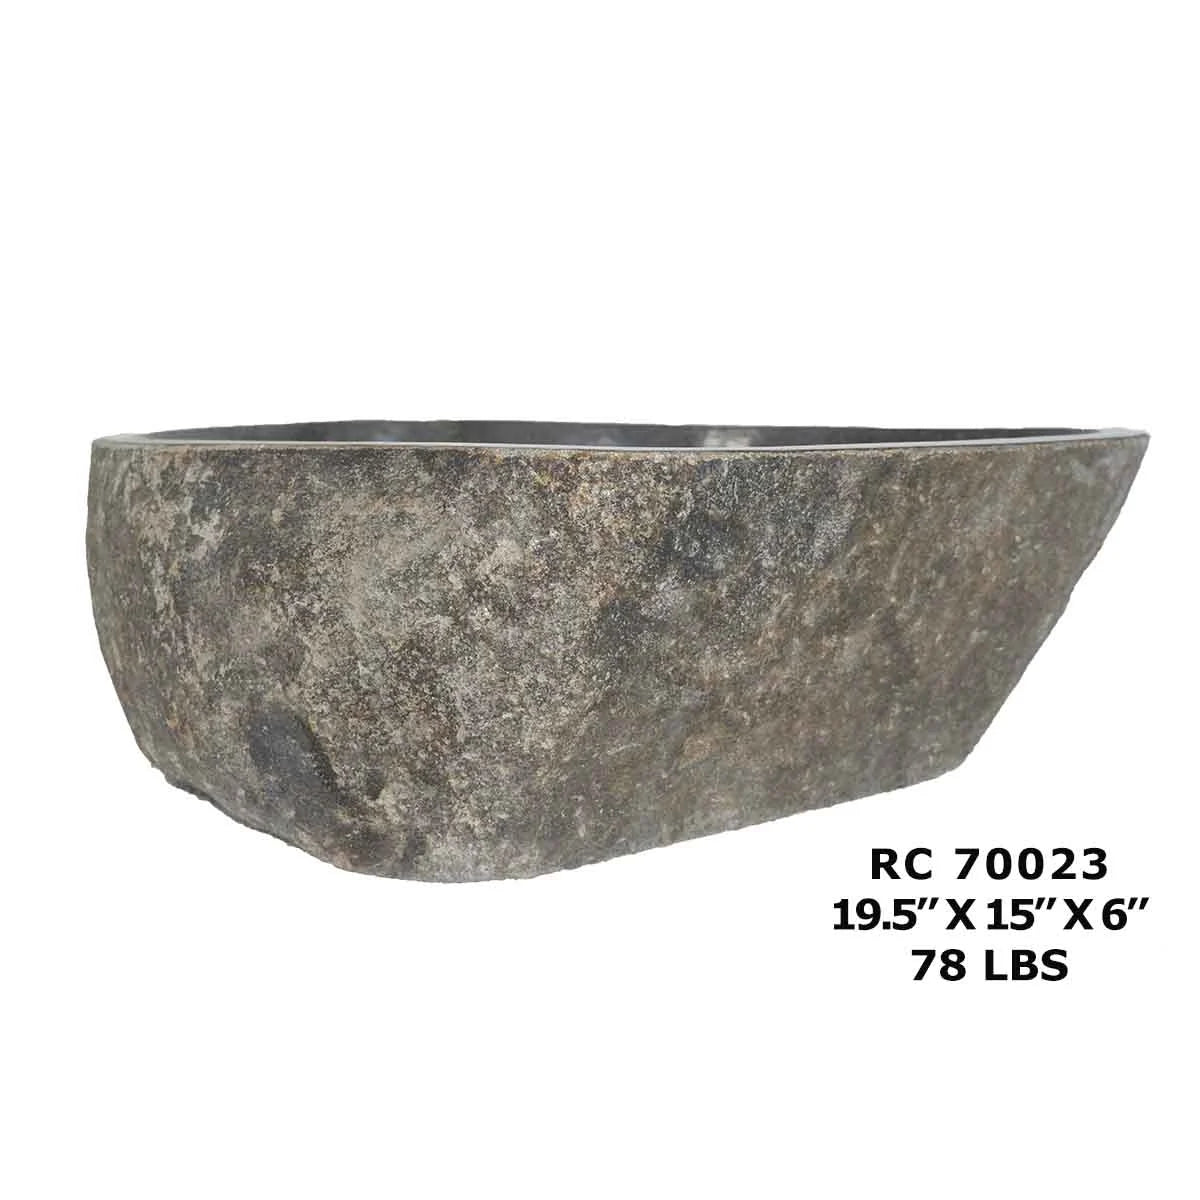 RC70023-Natural River Stone Round Vessel Sink for Bathroom